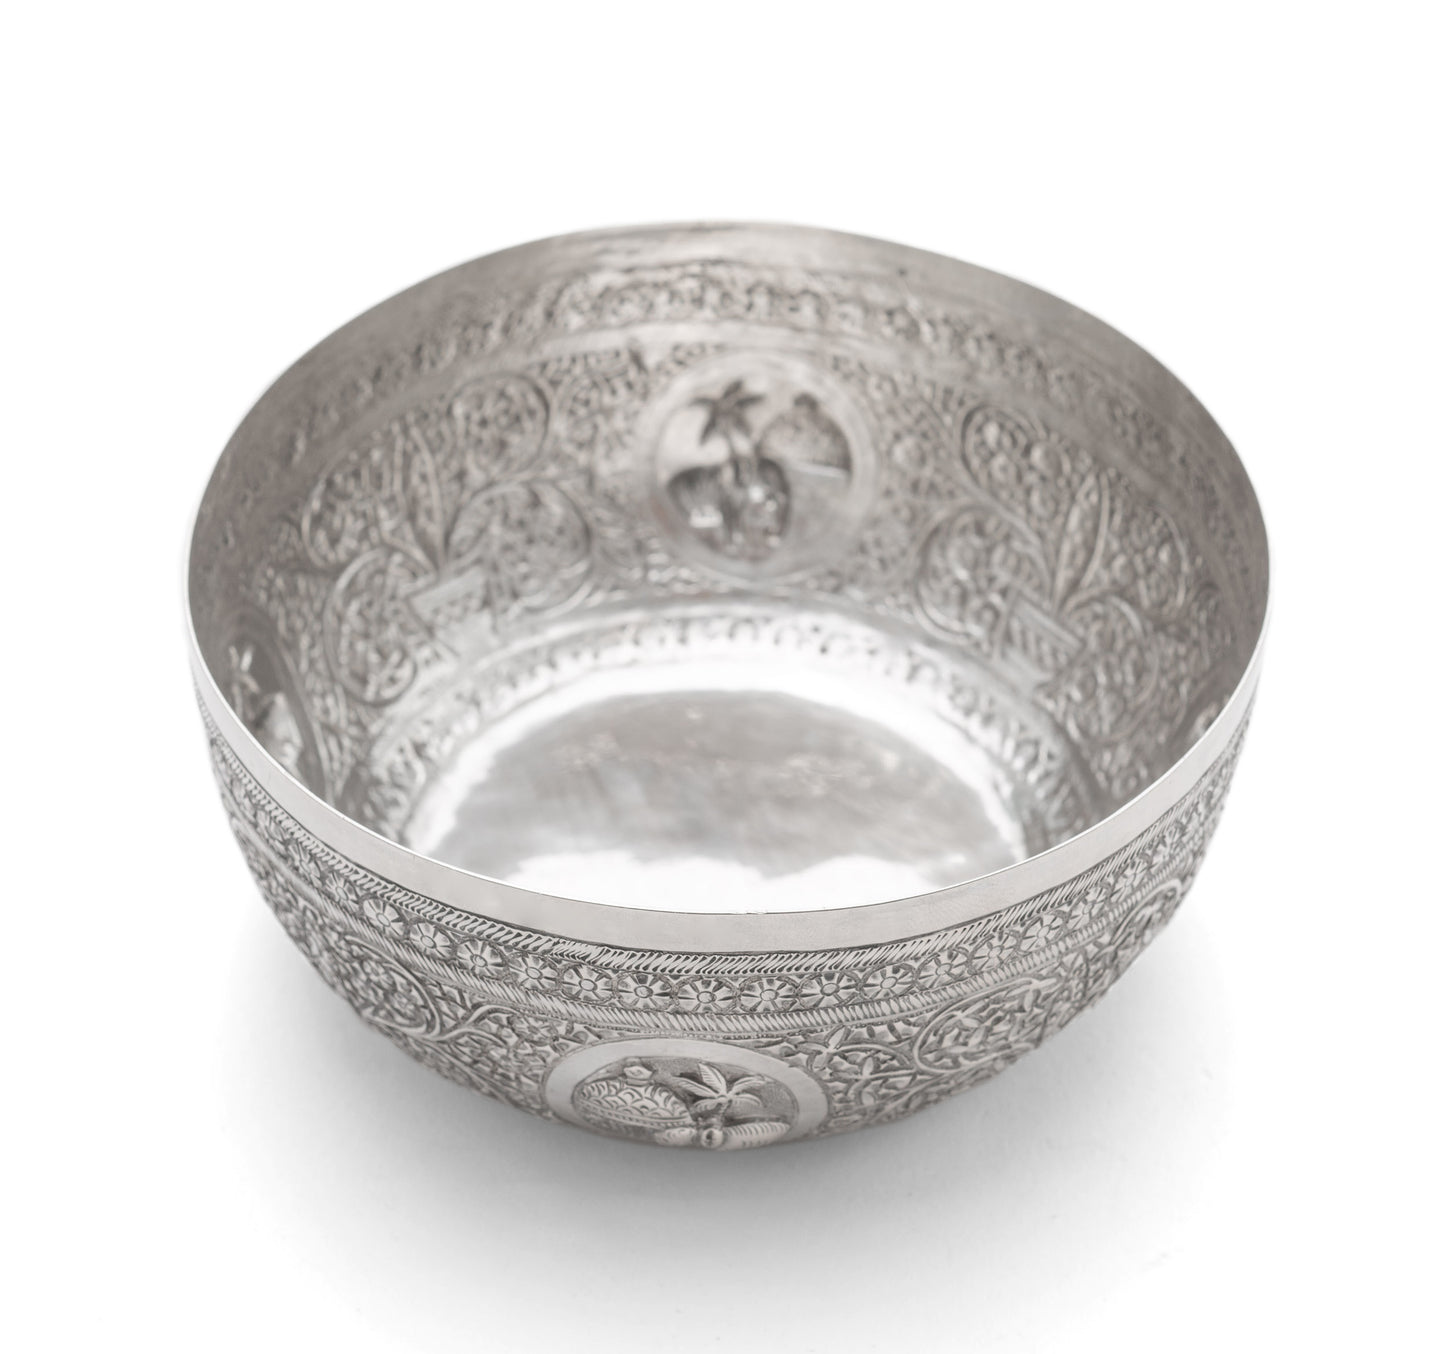 Antique Ceylonese (Sri Lankan) White Metal/Silver Offering Bowl with Elephants (Code 2116)